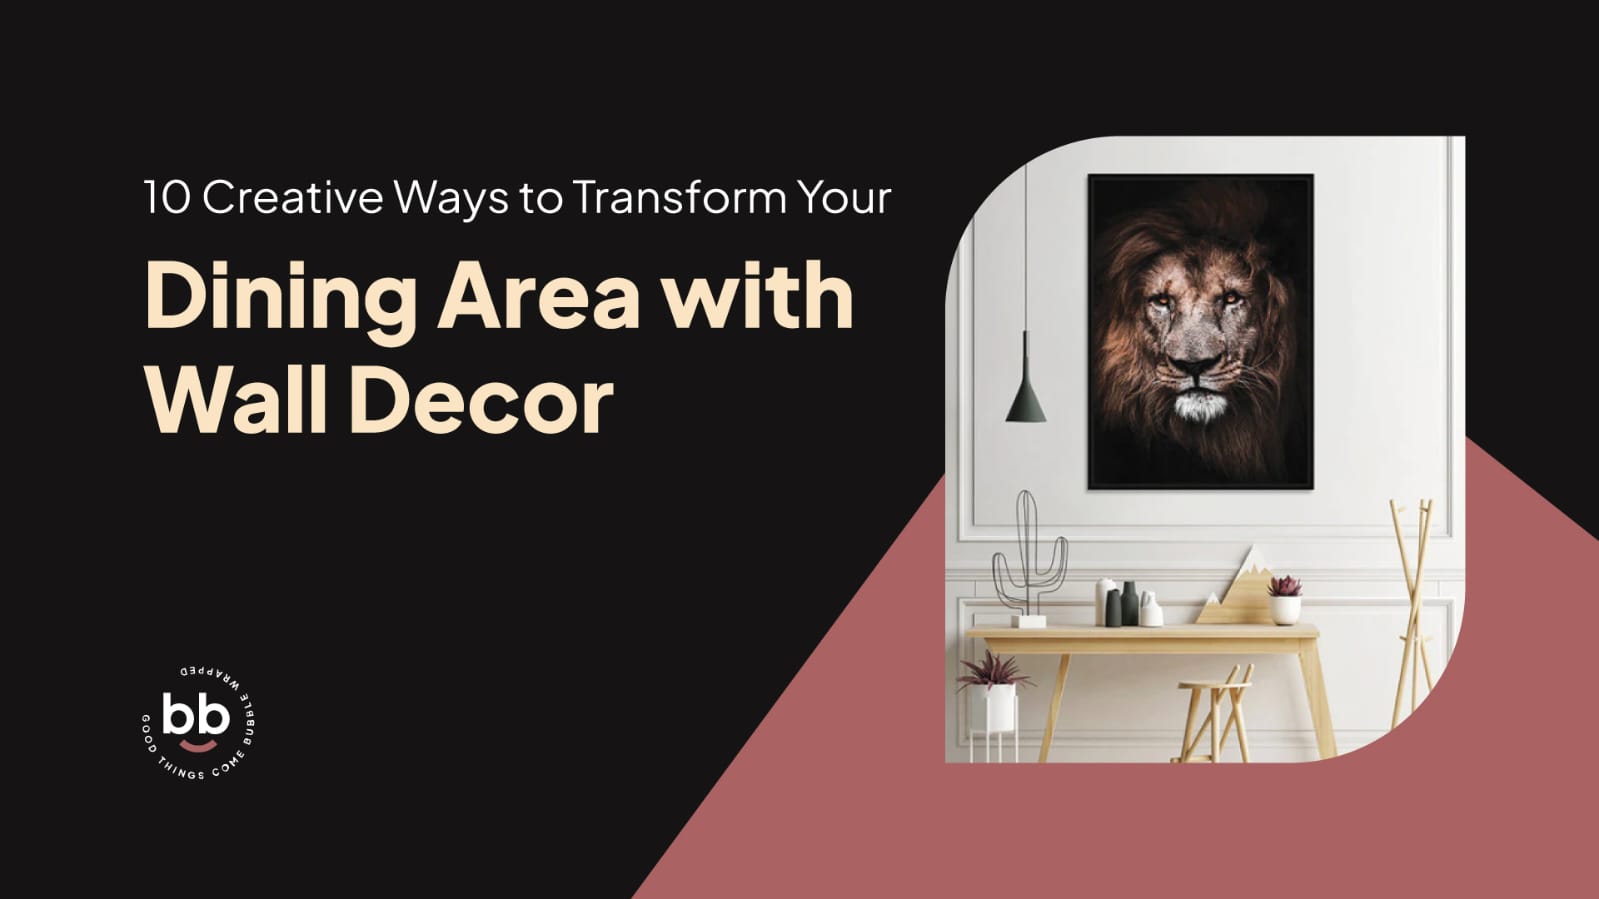 10 Creative Ways to Transform Your Dining Area with Wall Decor